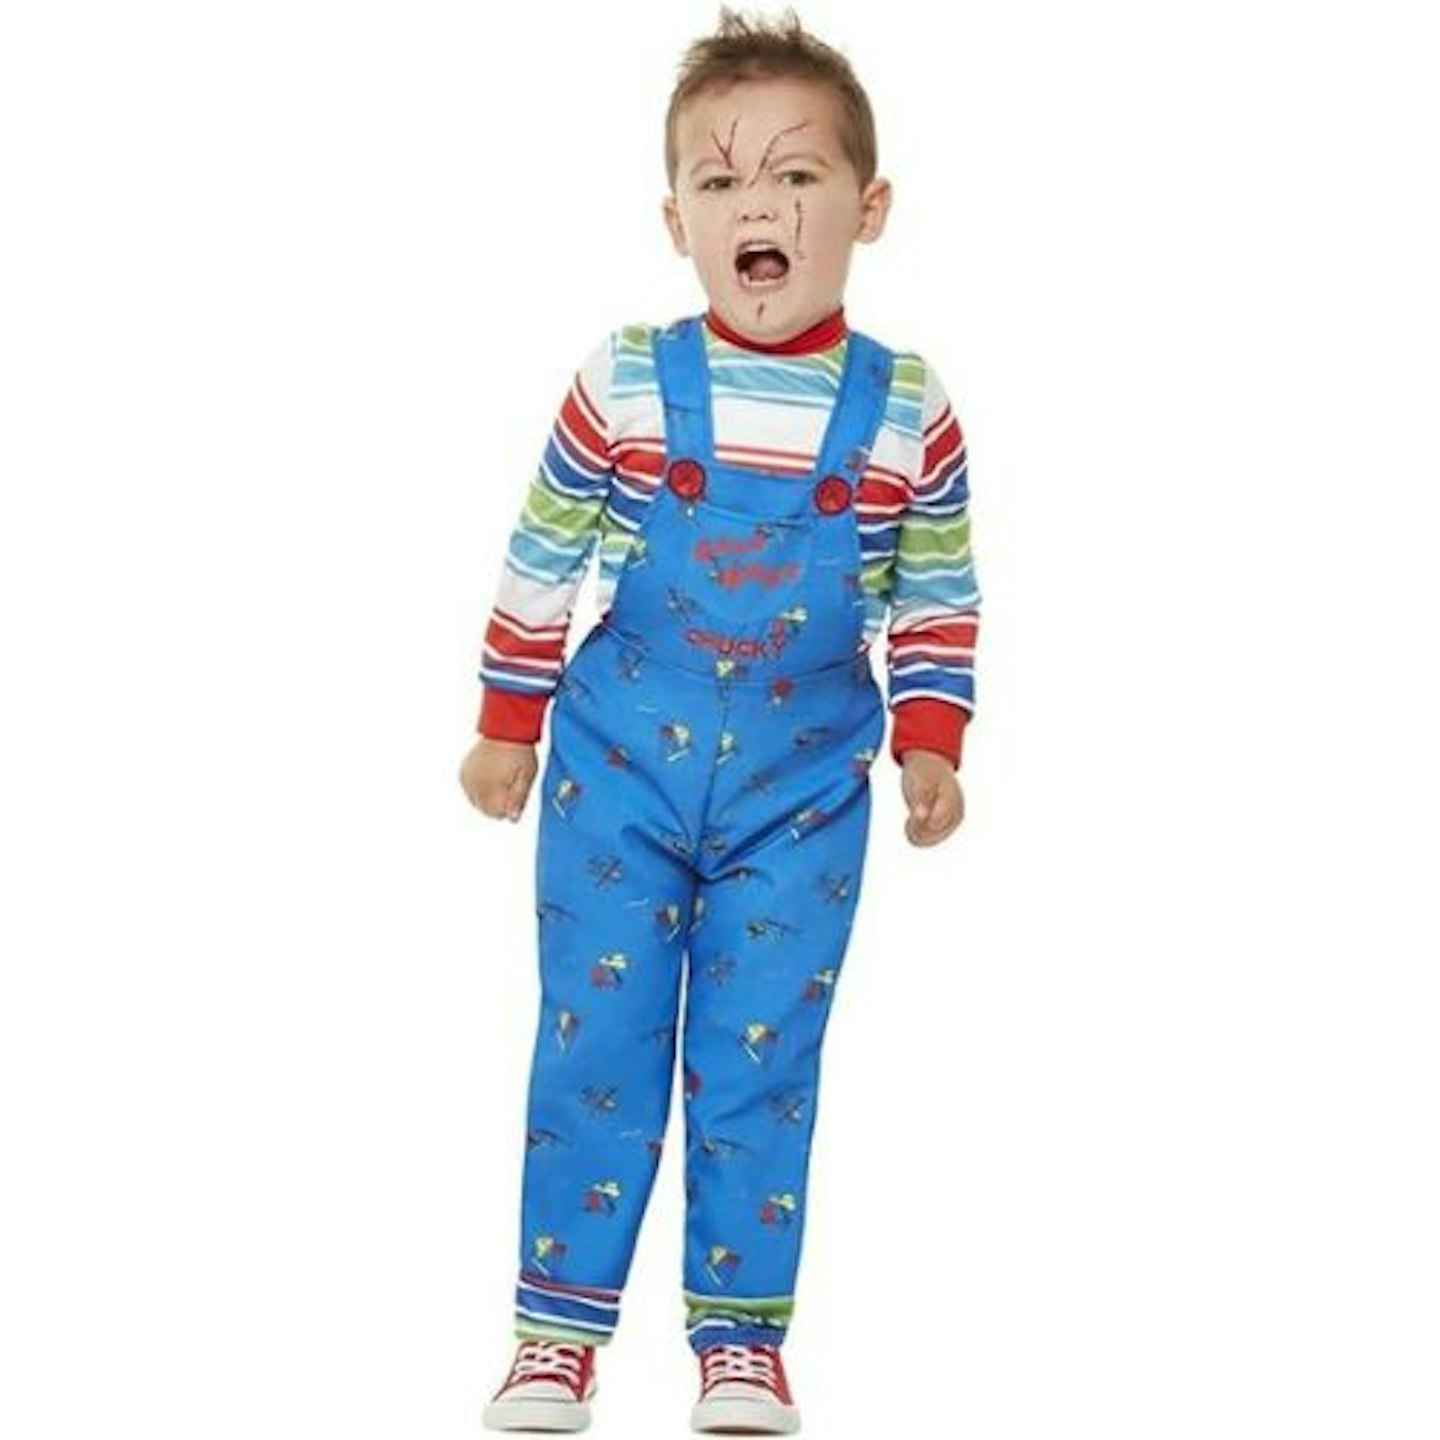 Kids Halloween Costumes: Smiffys Officially Licensed Chucky Costume